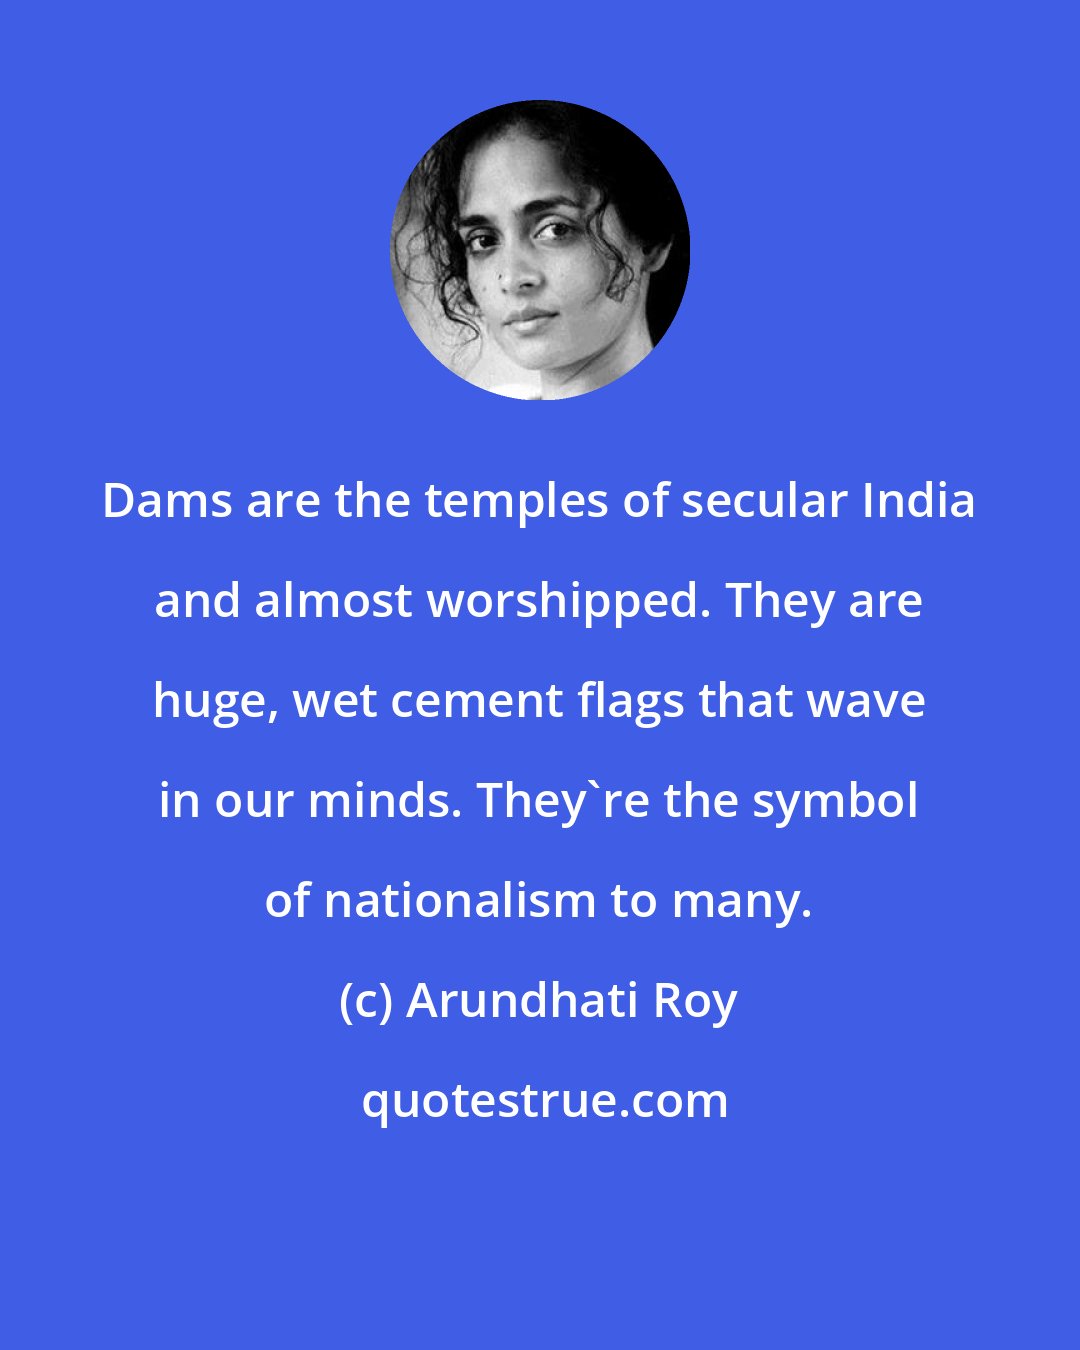 Arundhati Roy: Dams are the temples of secular India and almost worshipped. They are huge, wet cement flags that wave in our minds. They're the symbol of nationalism to many.